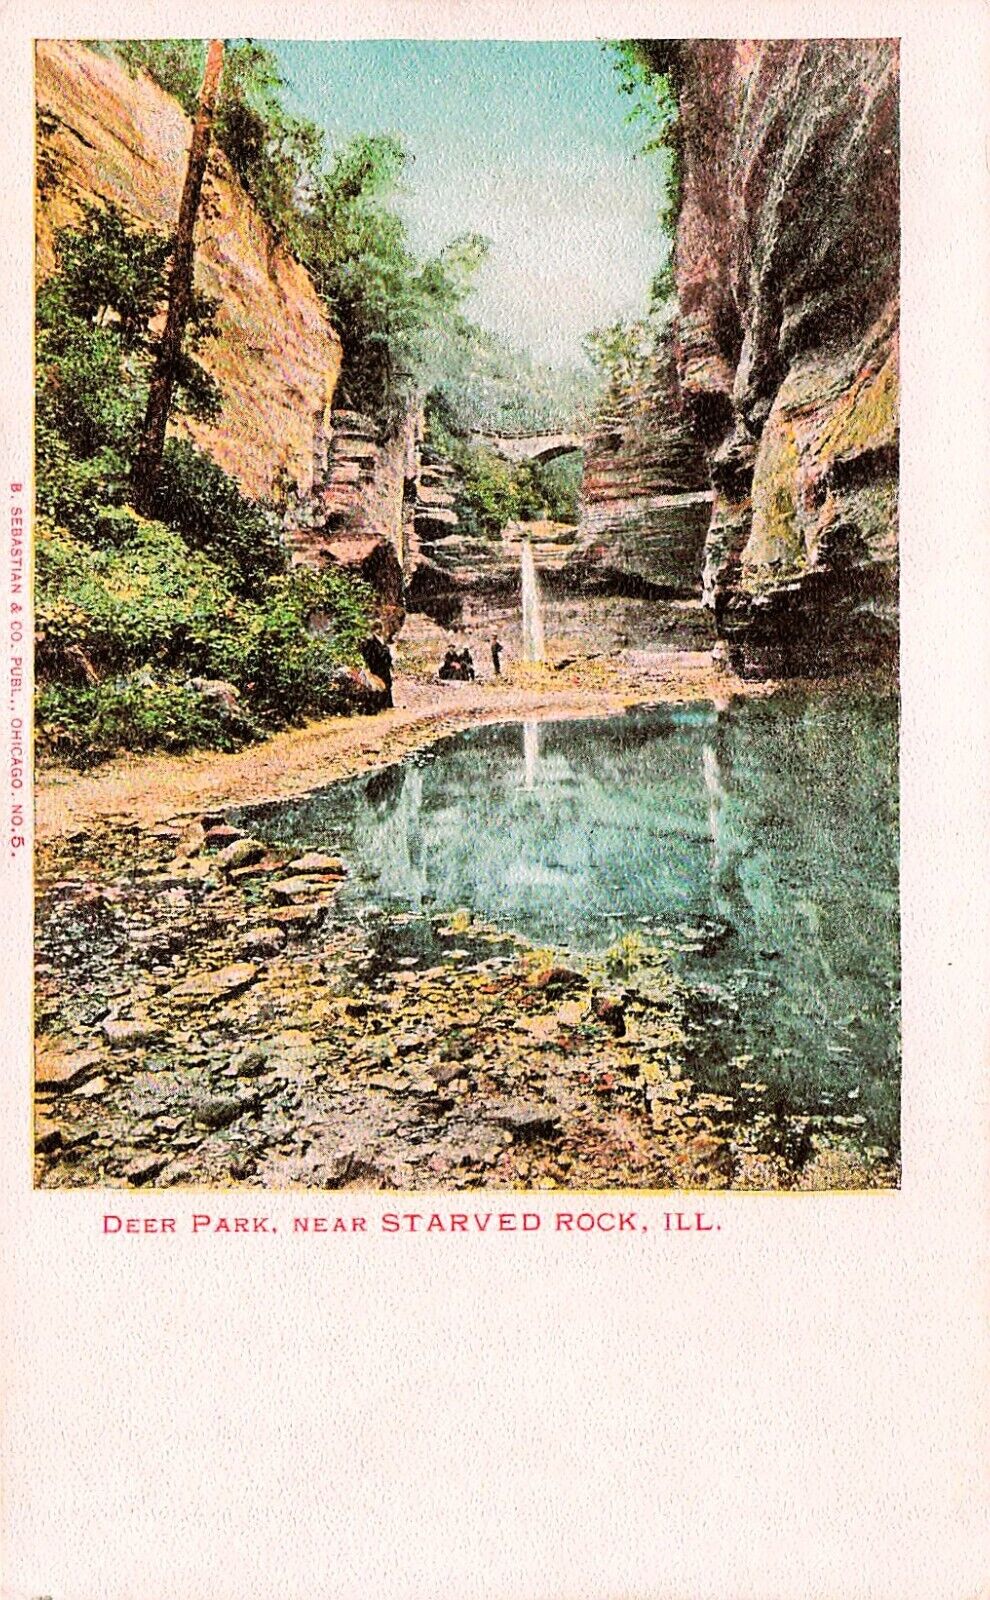 Oglesby Starved Rock Deer Park Illinois IL LaSalle County Waterfall Postcard E14